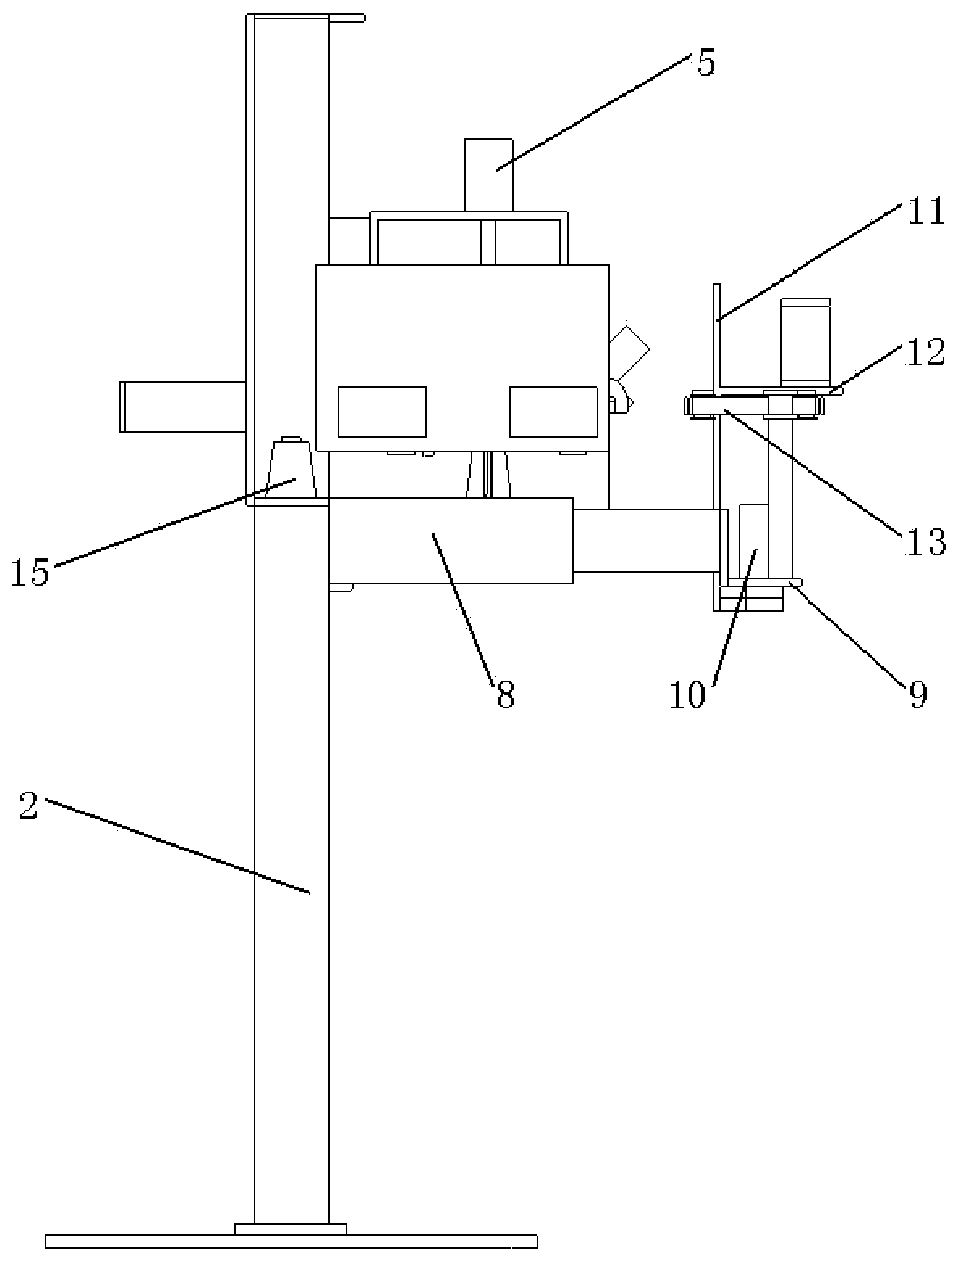 Reeled yarn automatic stock splitting, line binding and knotting device